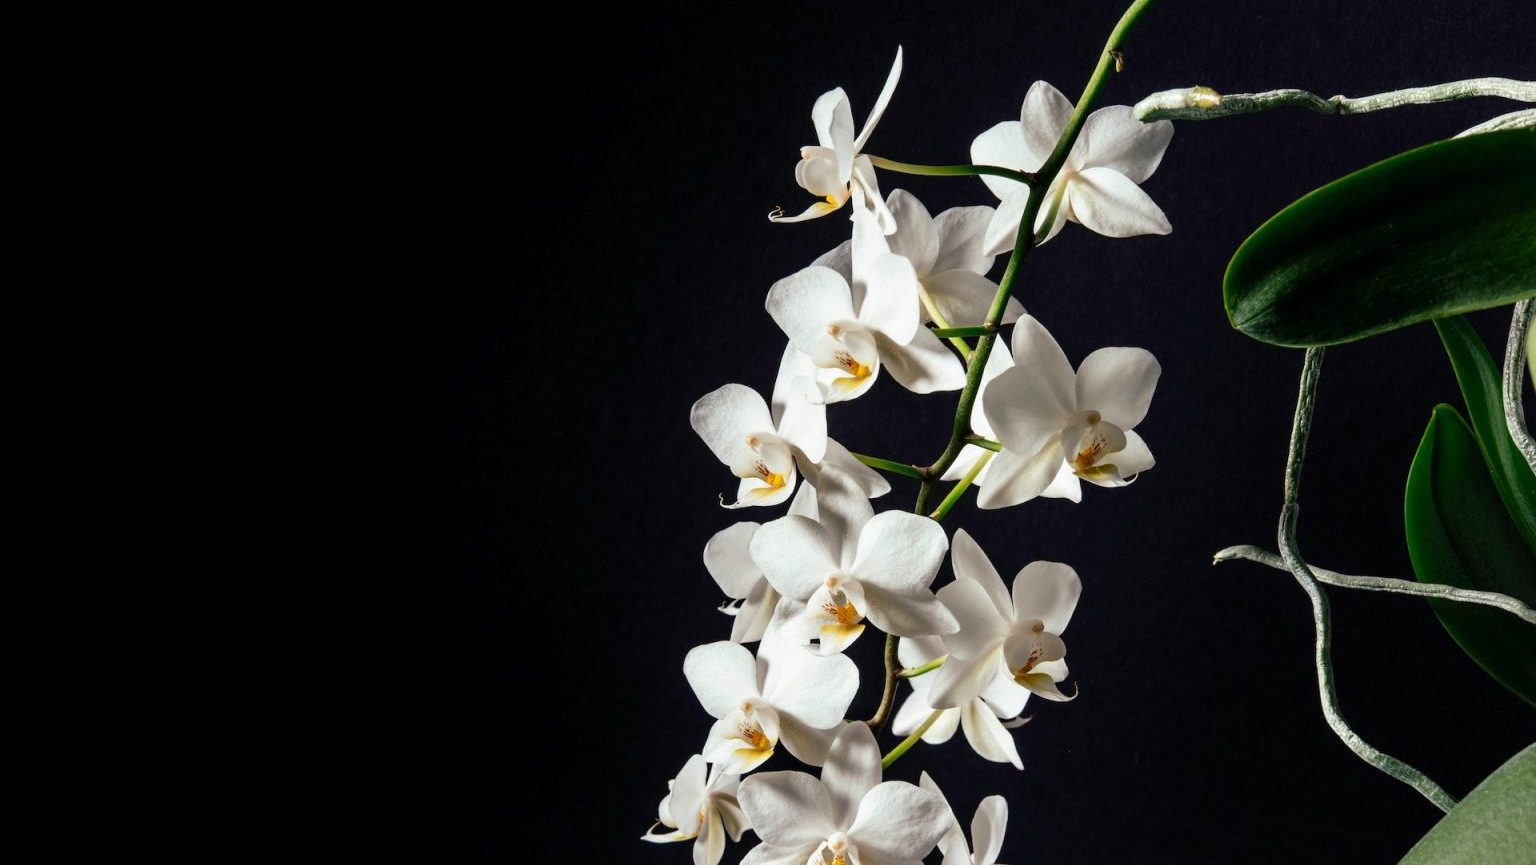 White orchids on a black background.